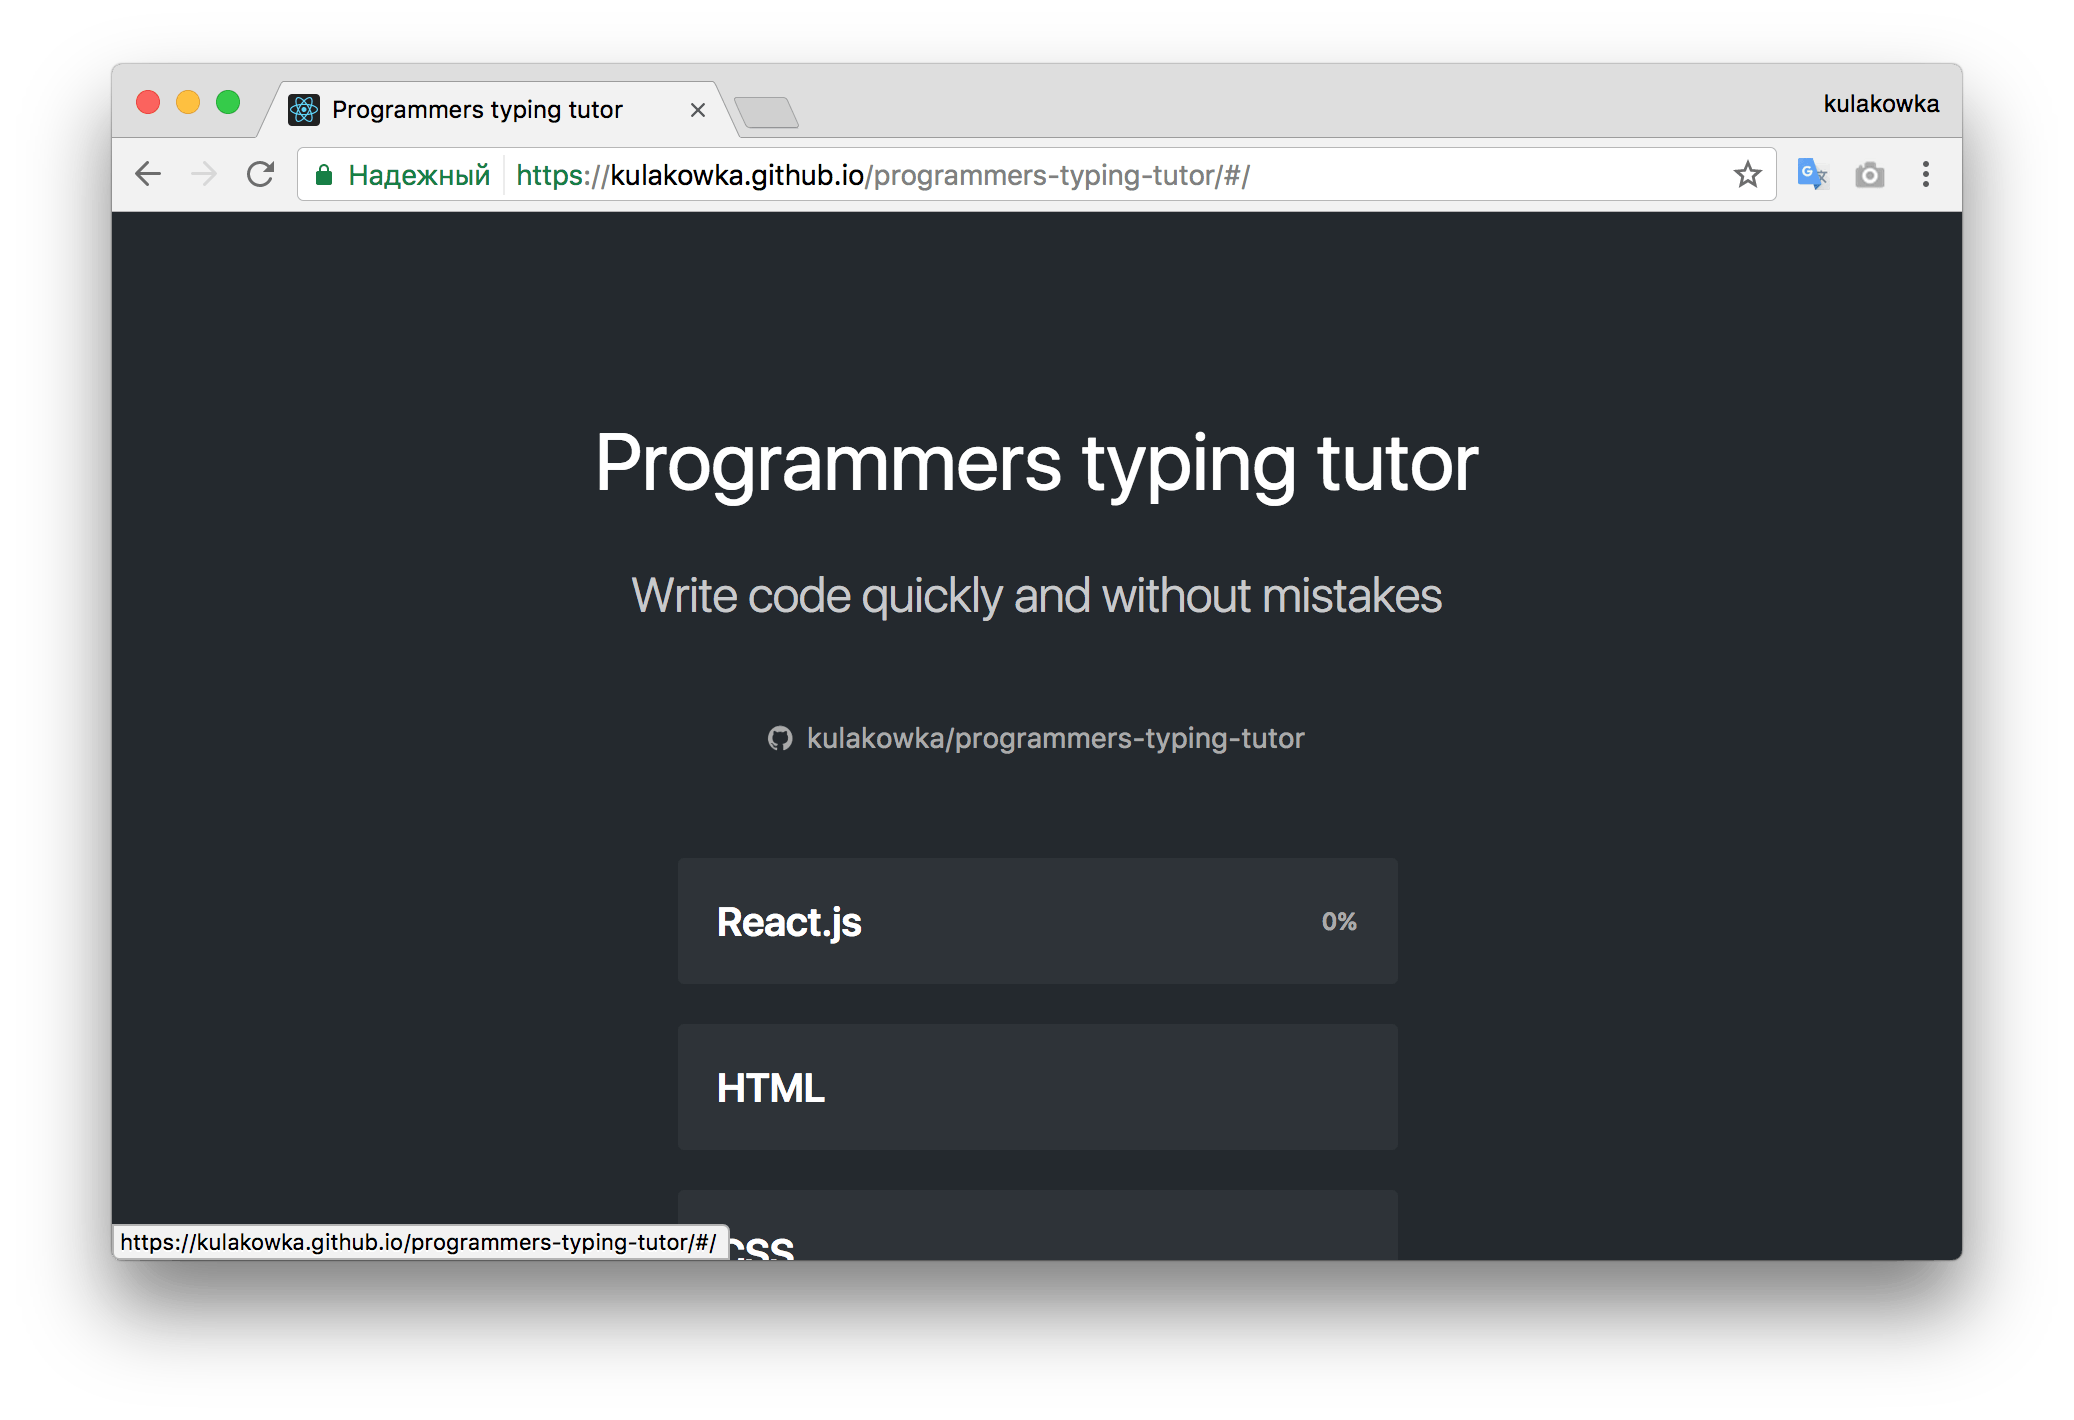 Programmers typing tutor - welcome